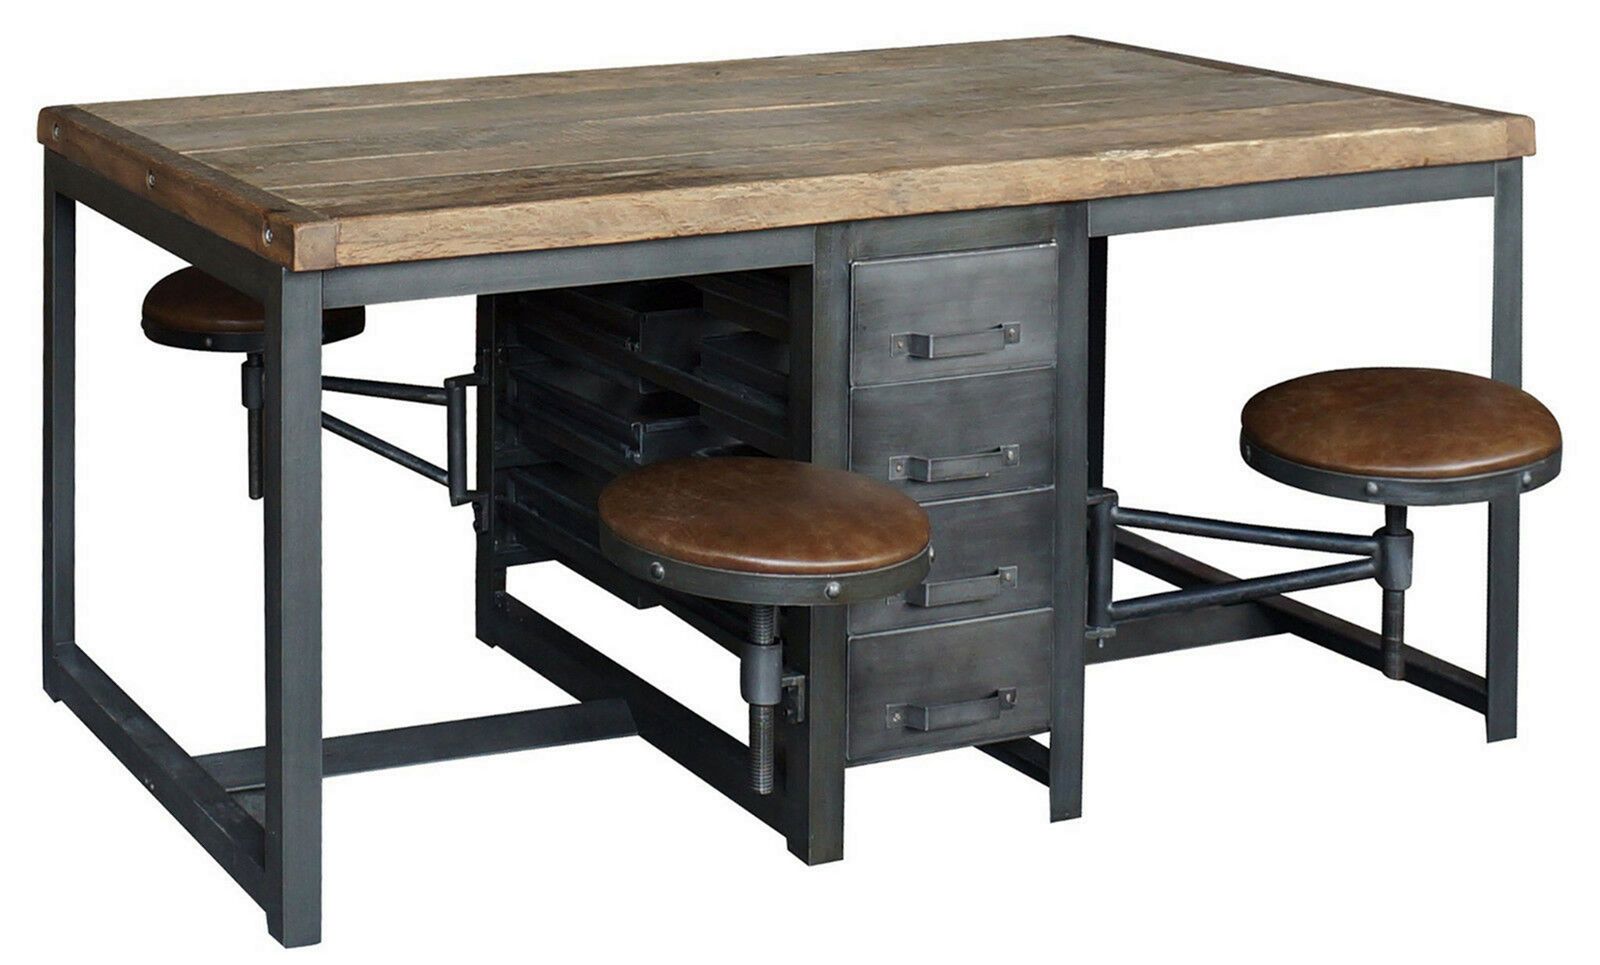 Workbench Of Semi Iron Table From Harmonbuilders